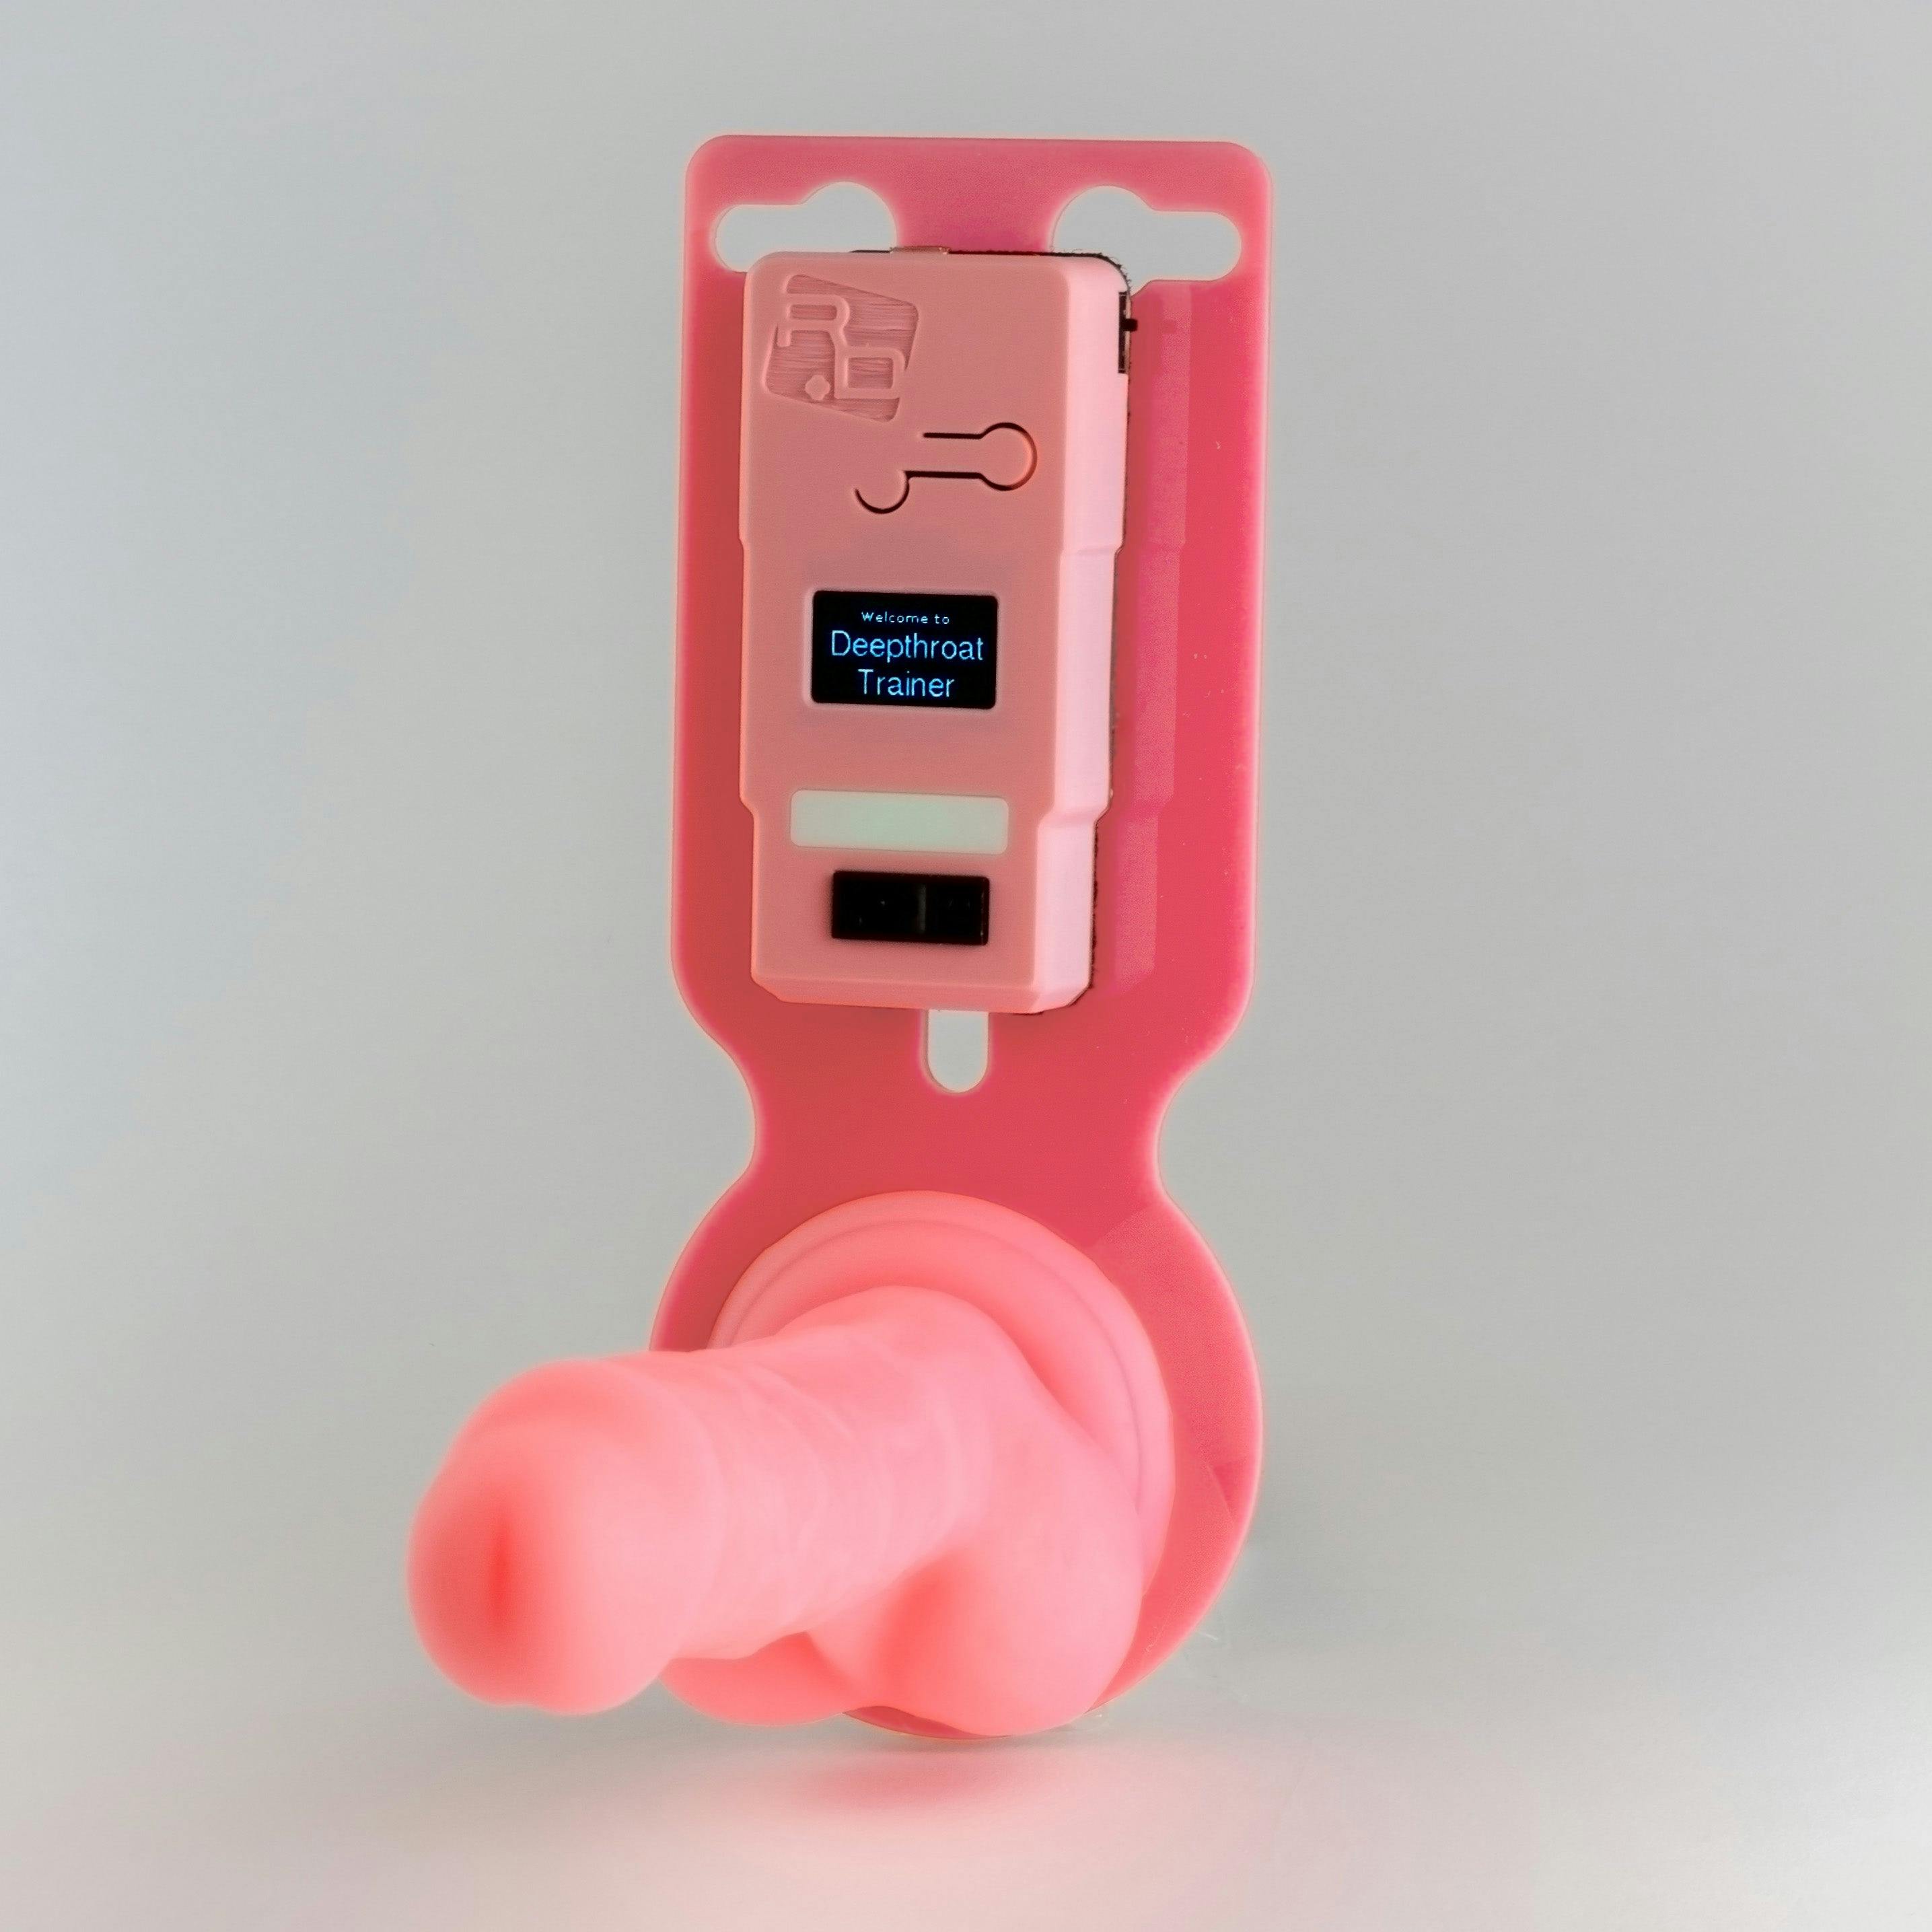 Deepthroat Trainer - PINK EDITION - PinkTrainerwithtoy